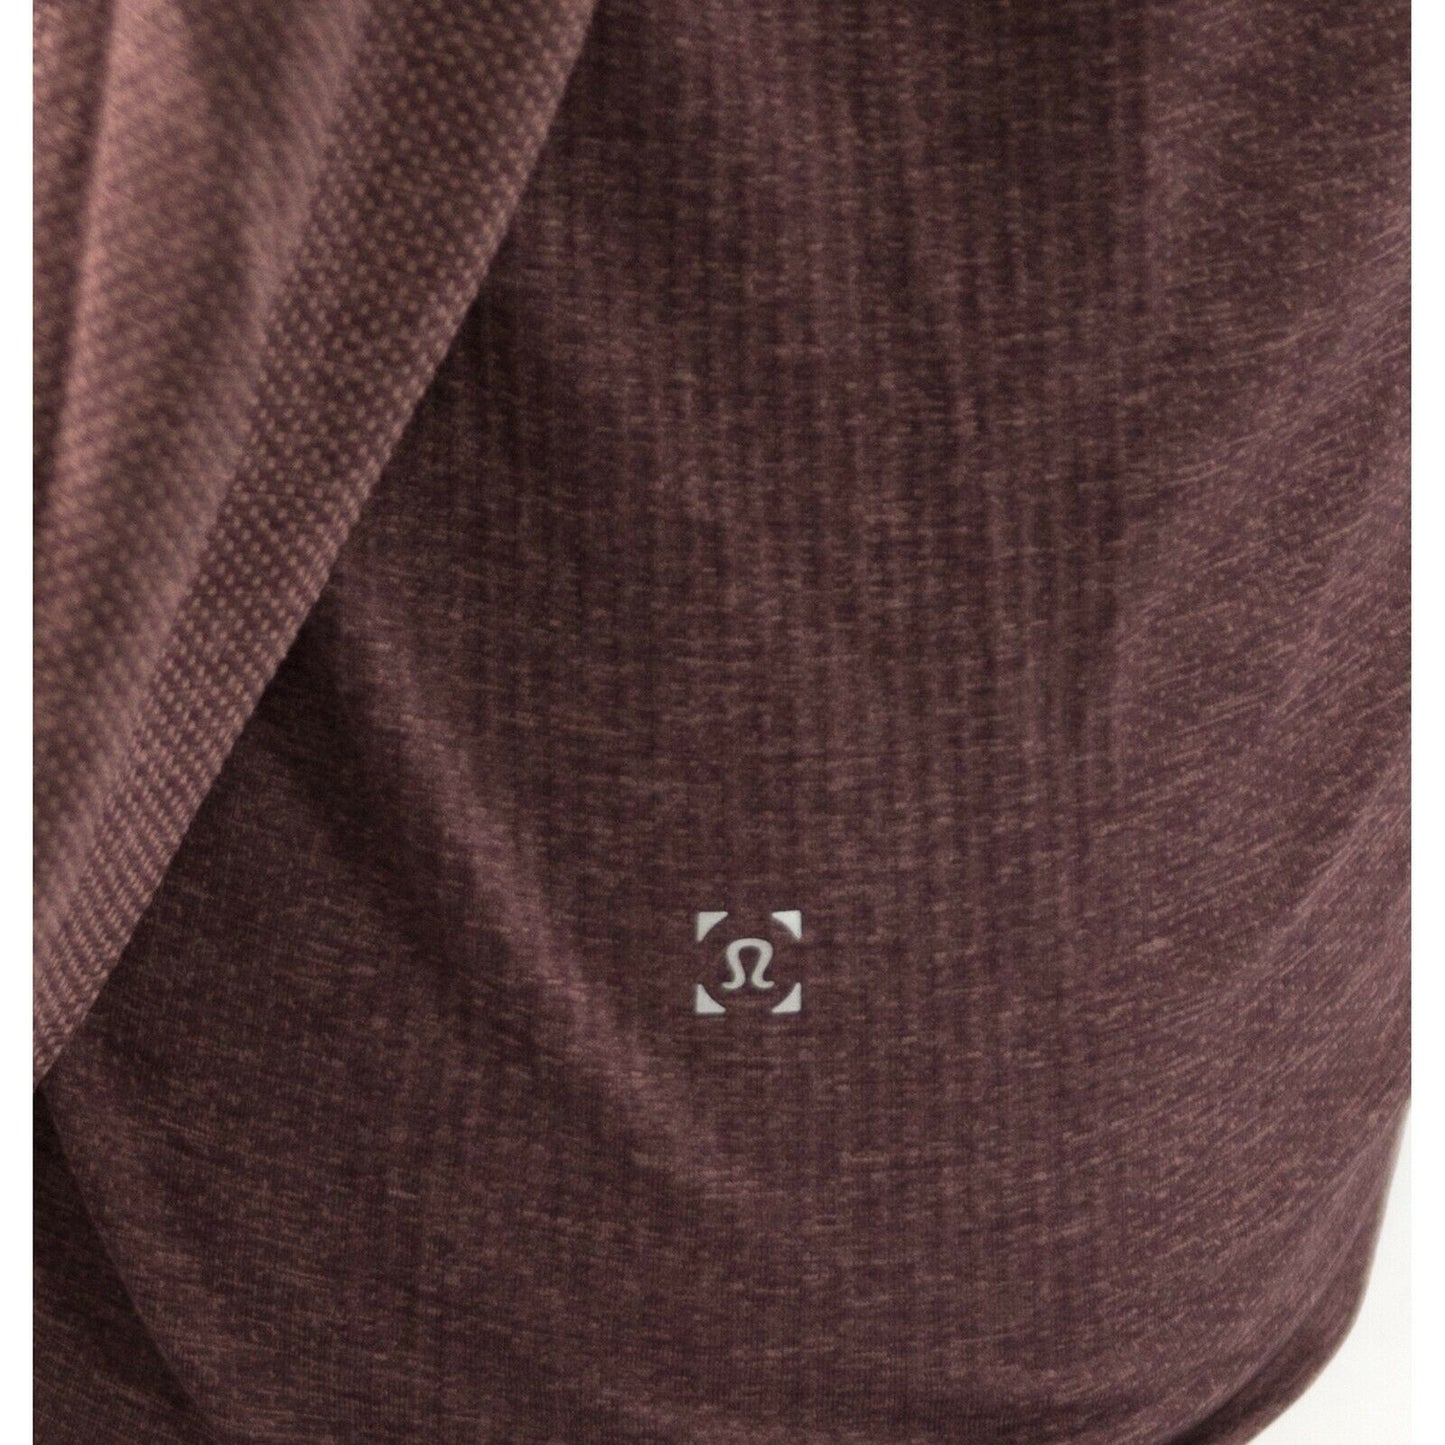 Lululemon Mens Maroon Metal Vent Tech Long Sleeve Fitted T-shirt M NWT